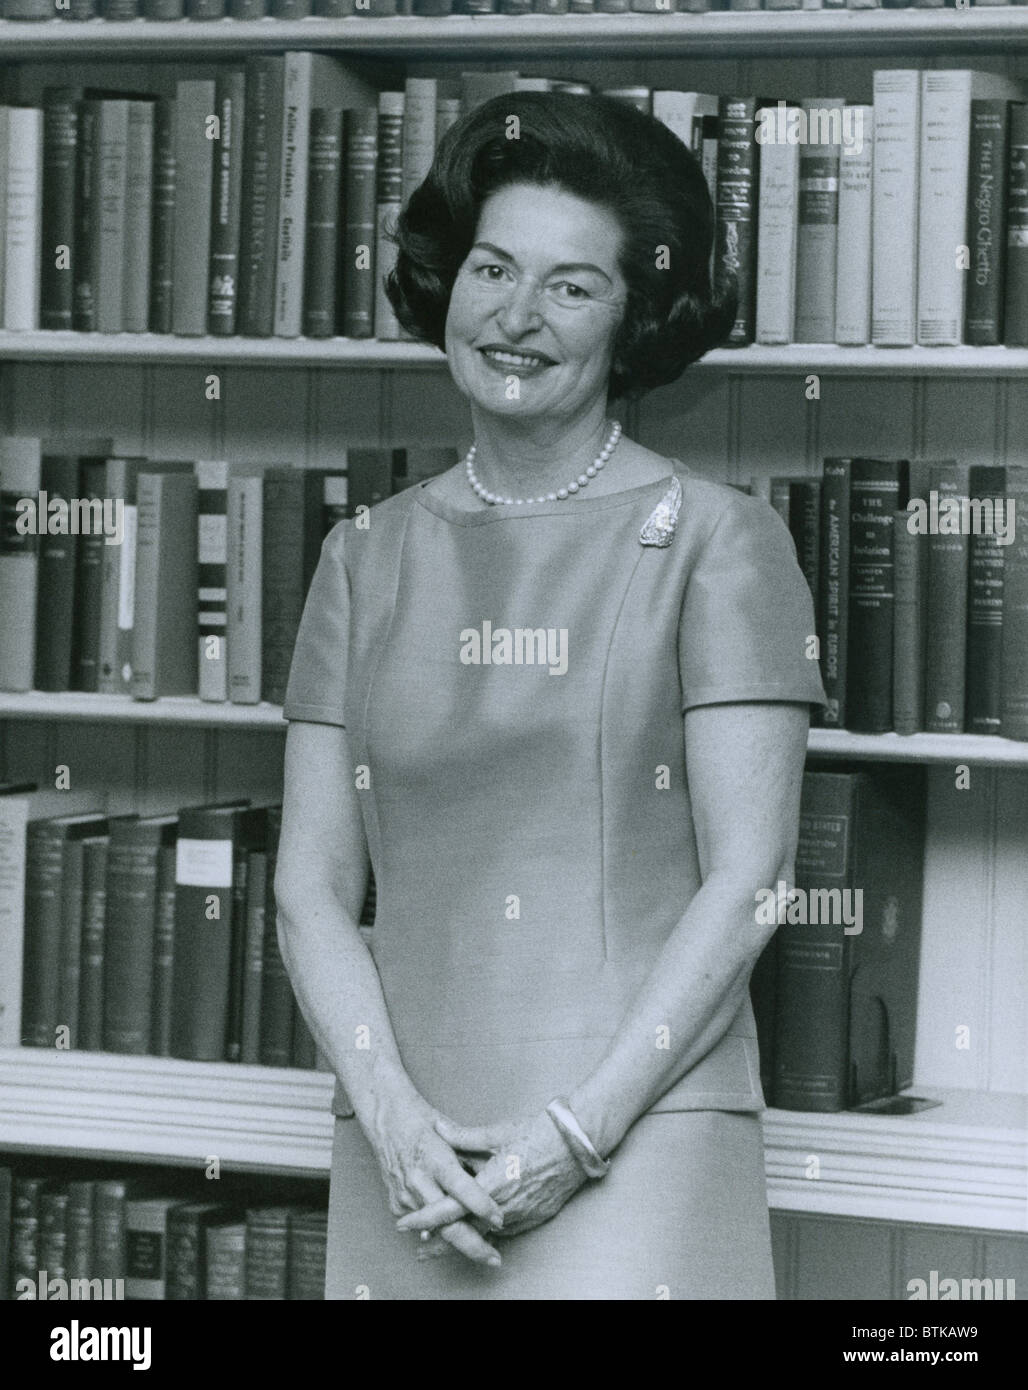 First Lady, Lady Bird Johnson, in 1964 White House portrait. Stock Photo